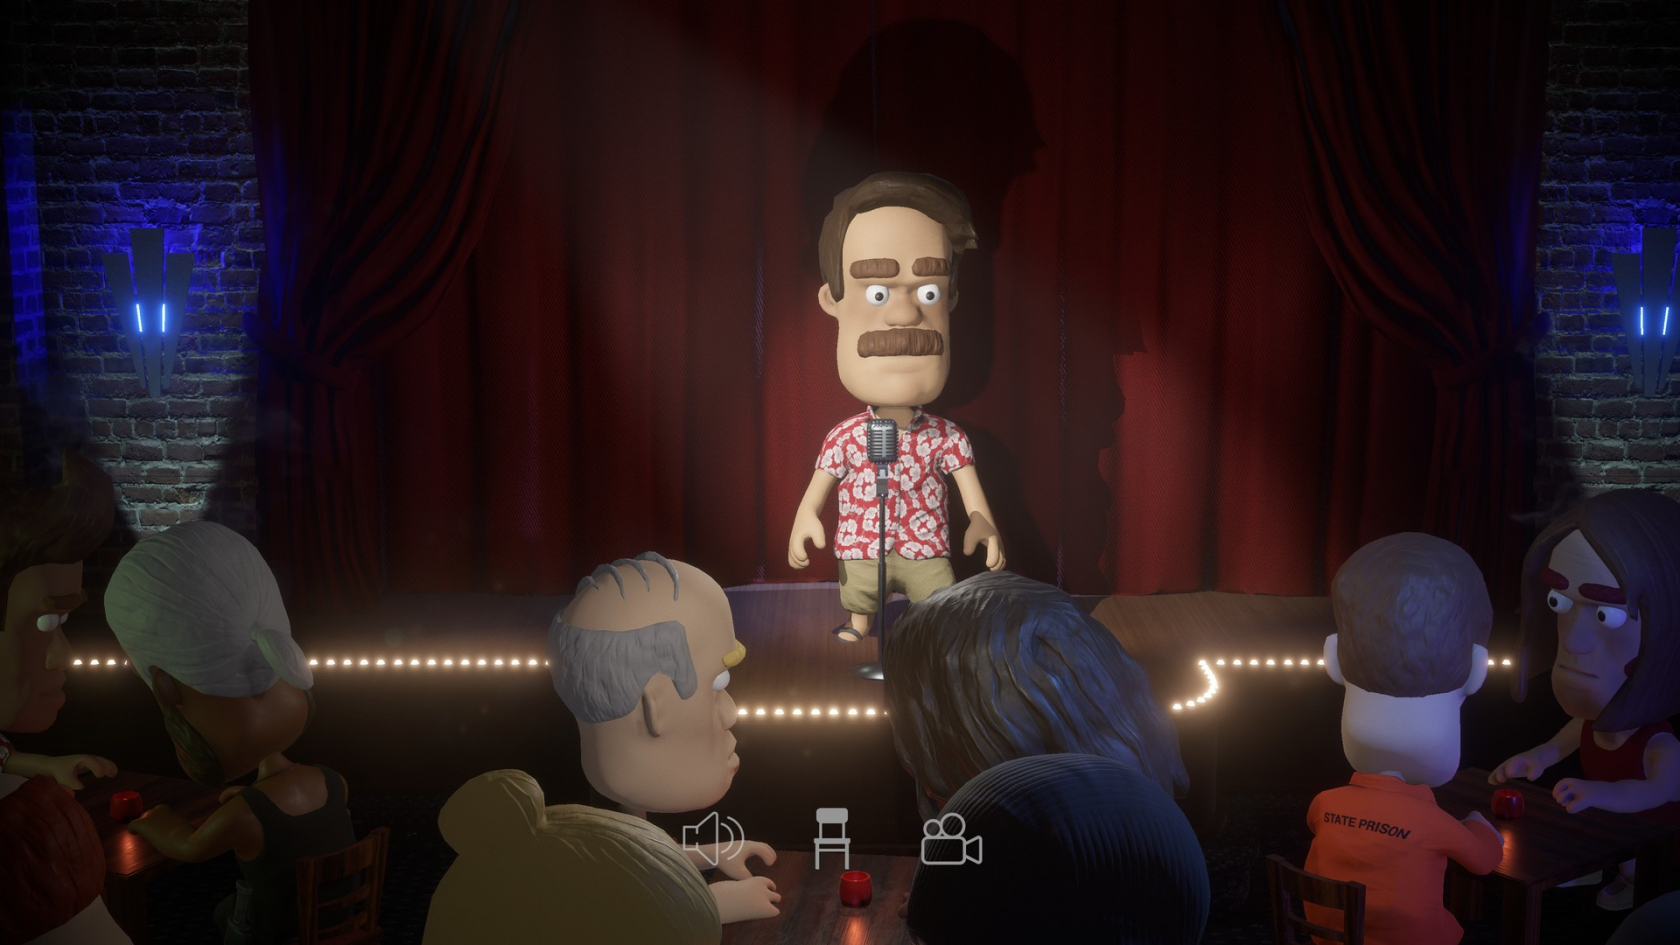 Comedy Night puts you on a virtual stage to try out jokes on real audiences